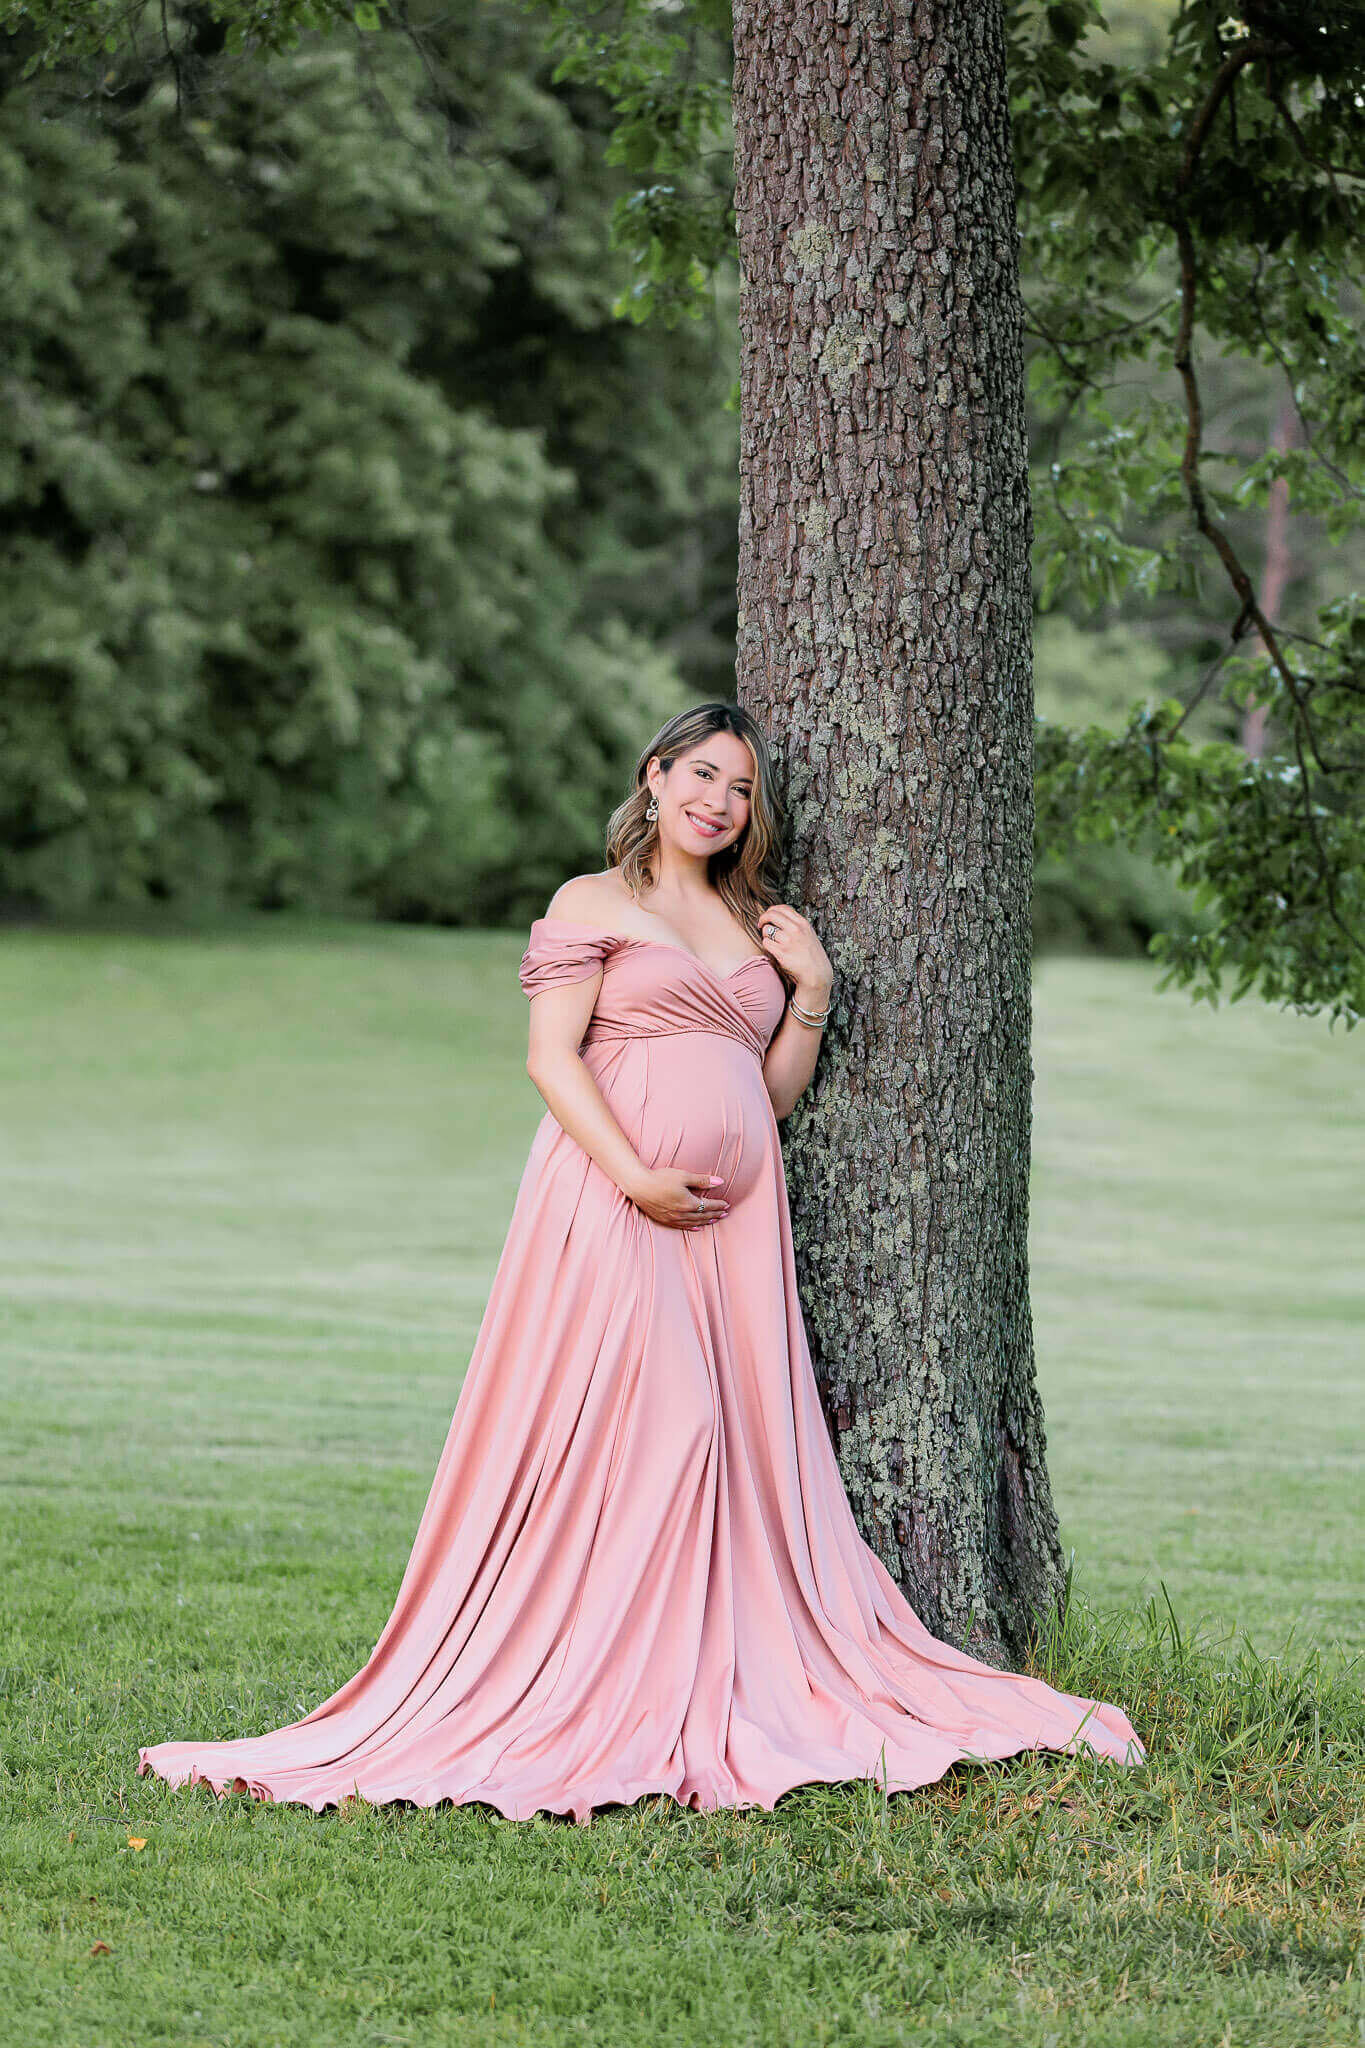 A momma-to-be posing against a tree at a park in Fairfax County.